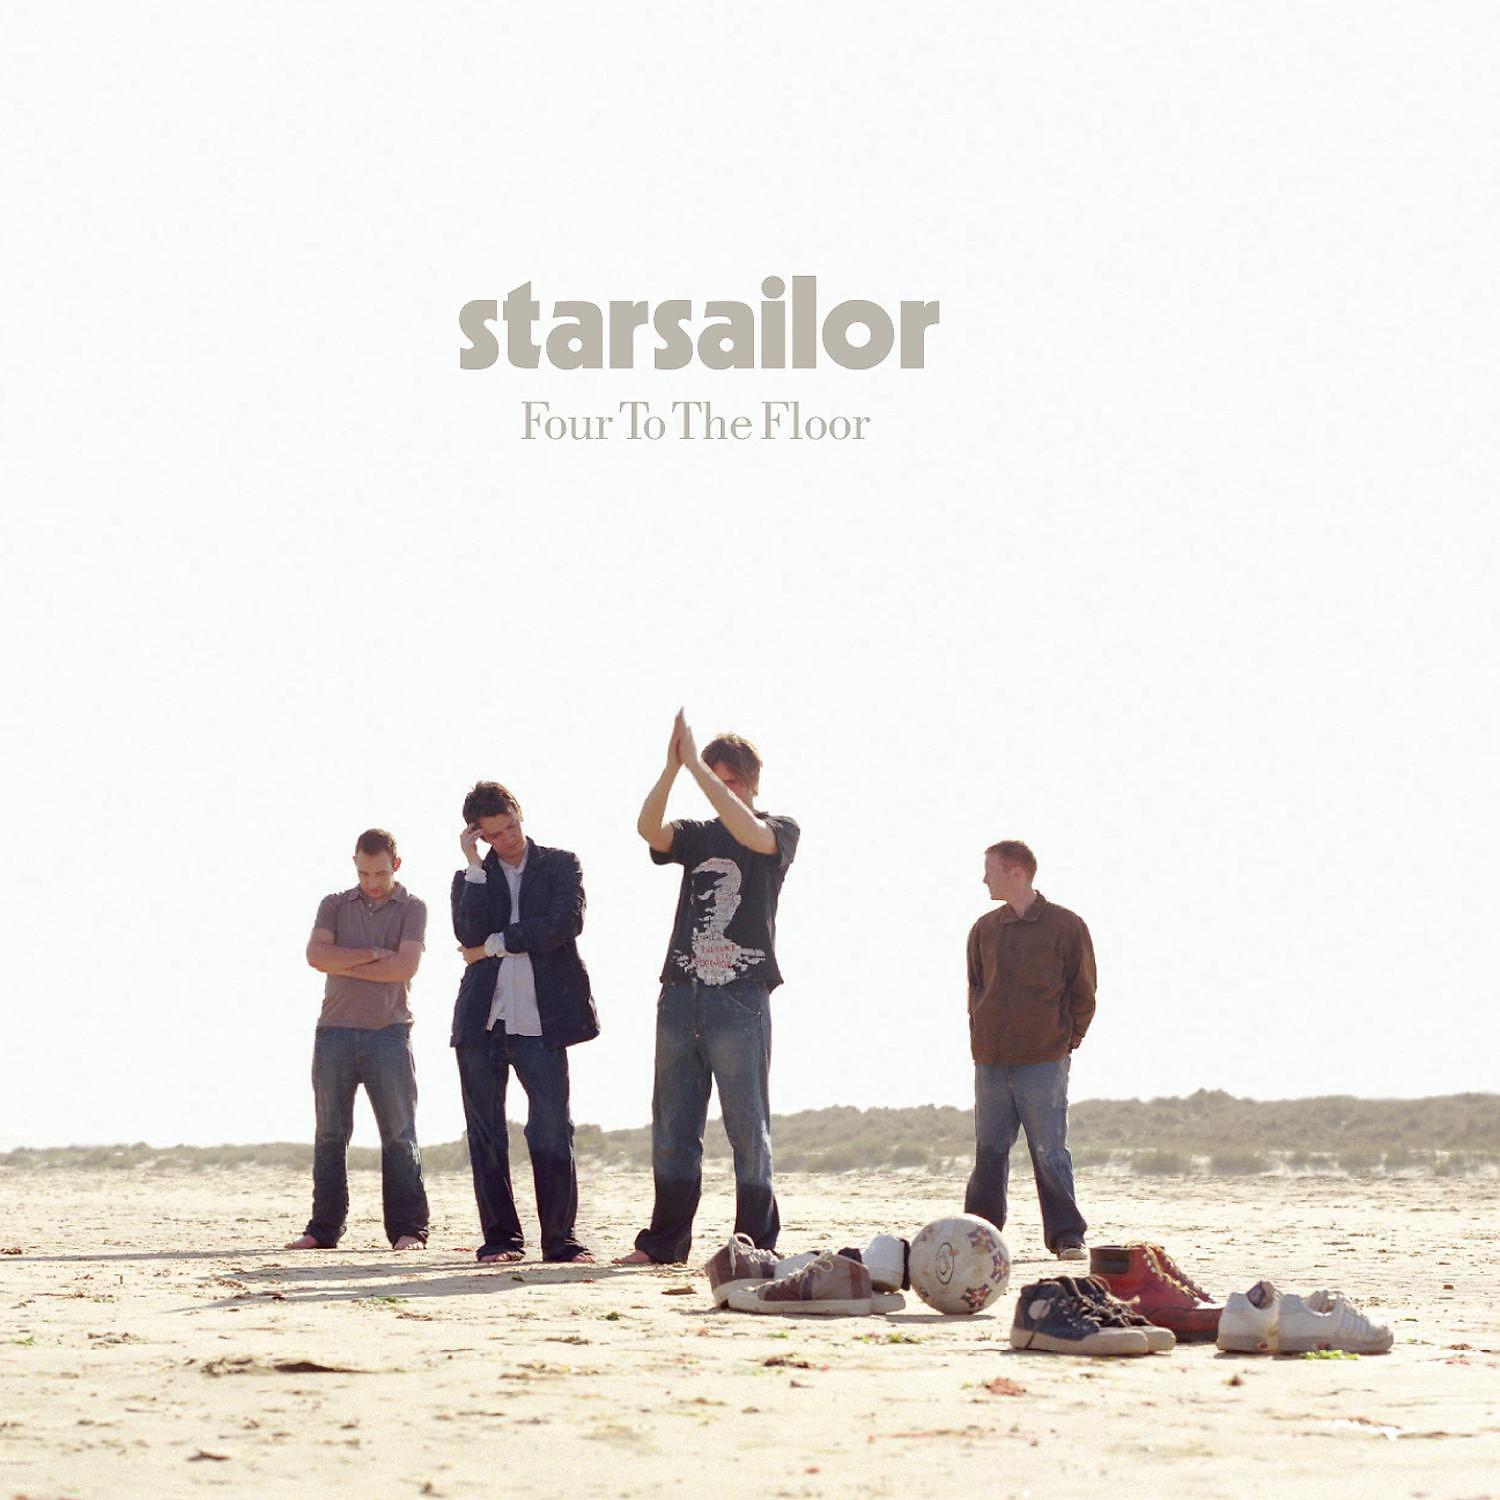 Go to 4 floor. 4 To the Floor. Starsailor four to the Floor. Starsailor альбом. 4 To the Floor Hugel обложка.